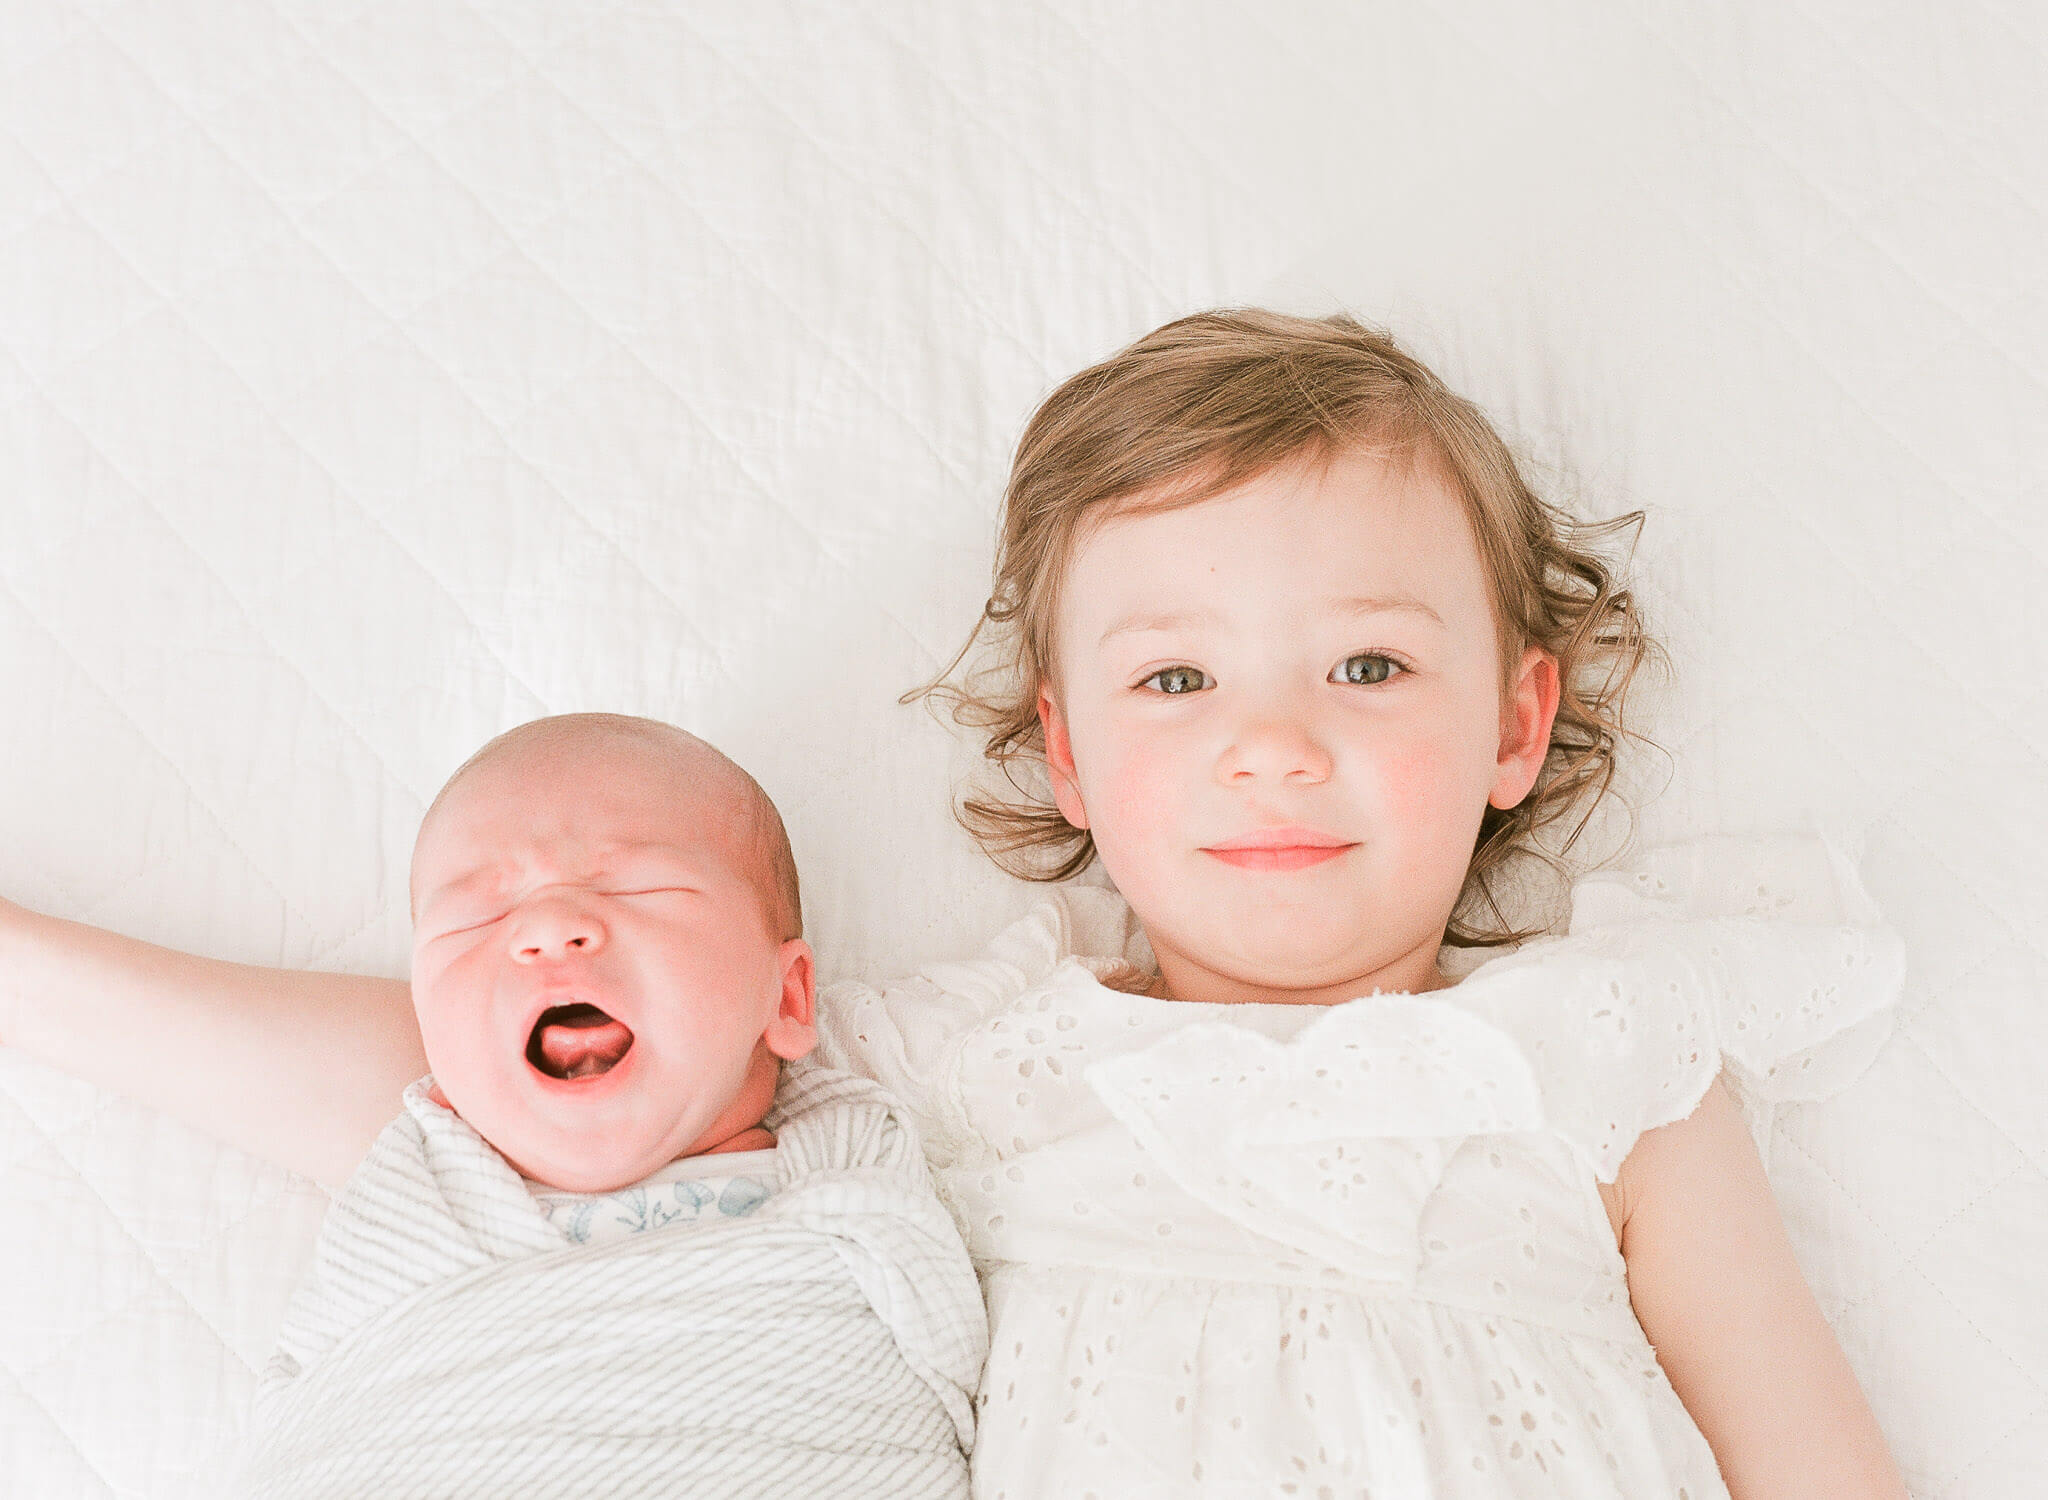 5 Easy Ways You can Prepare for Newborn Photos at Home2048 x 1500